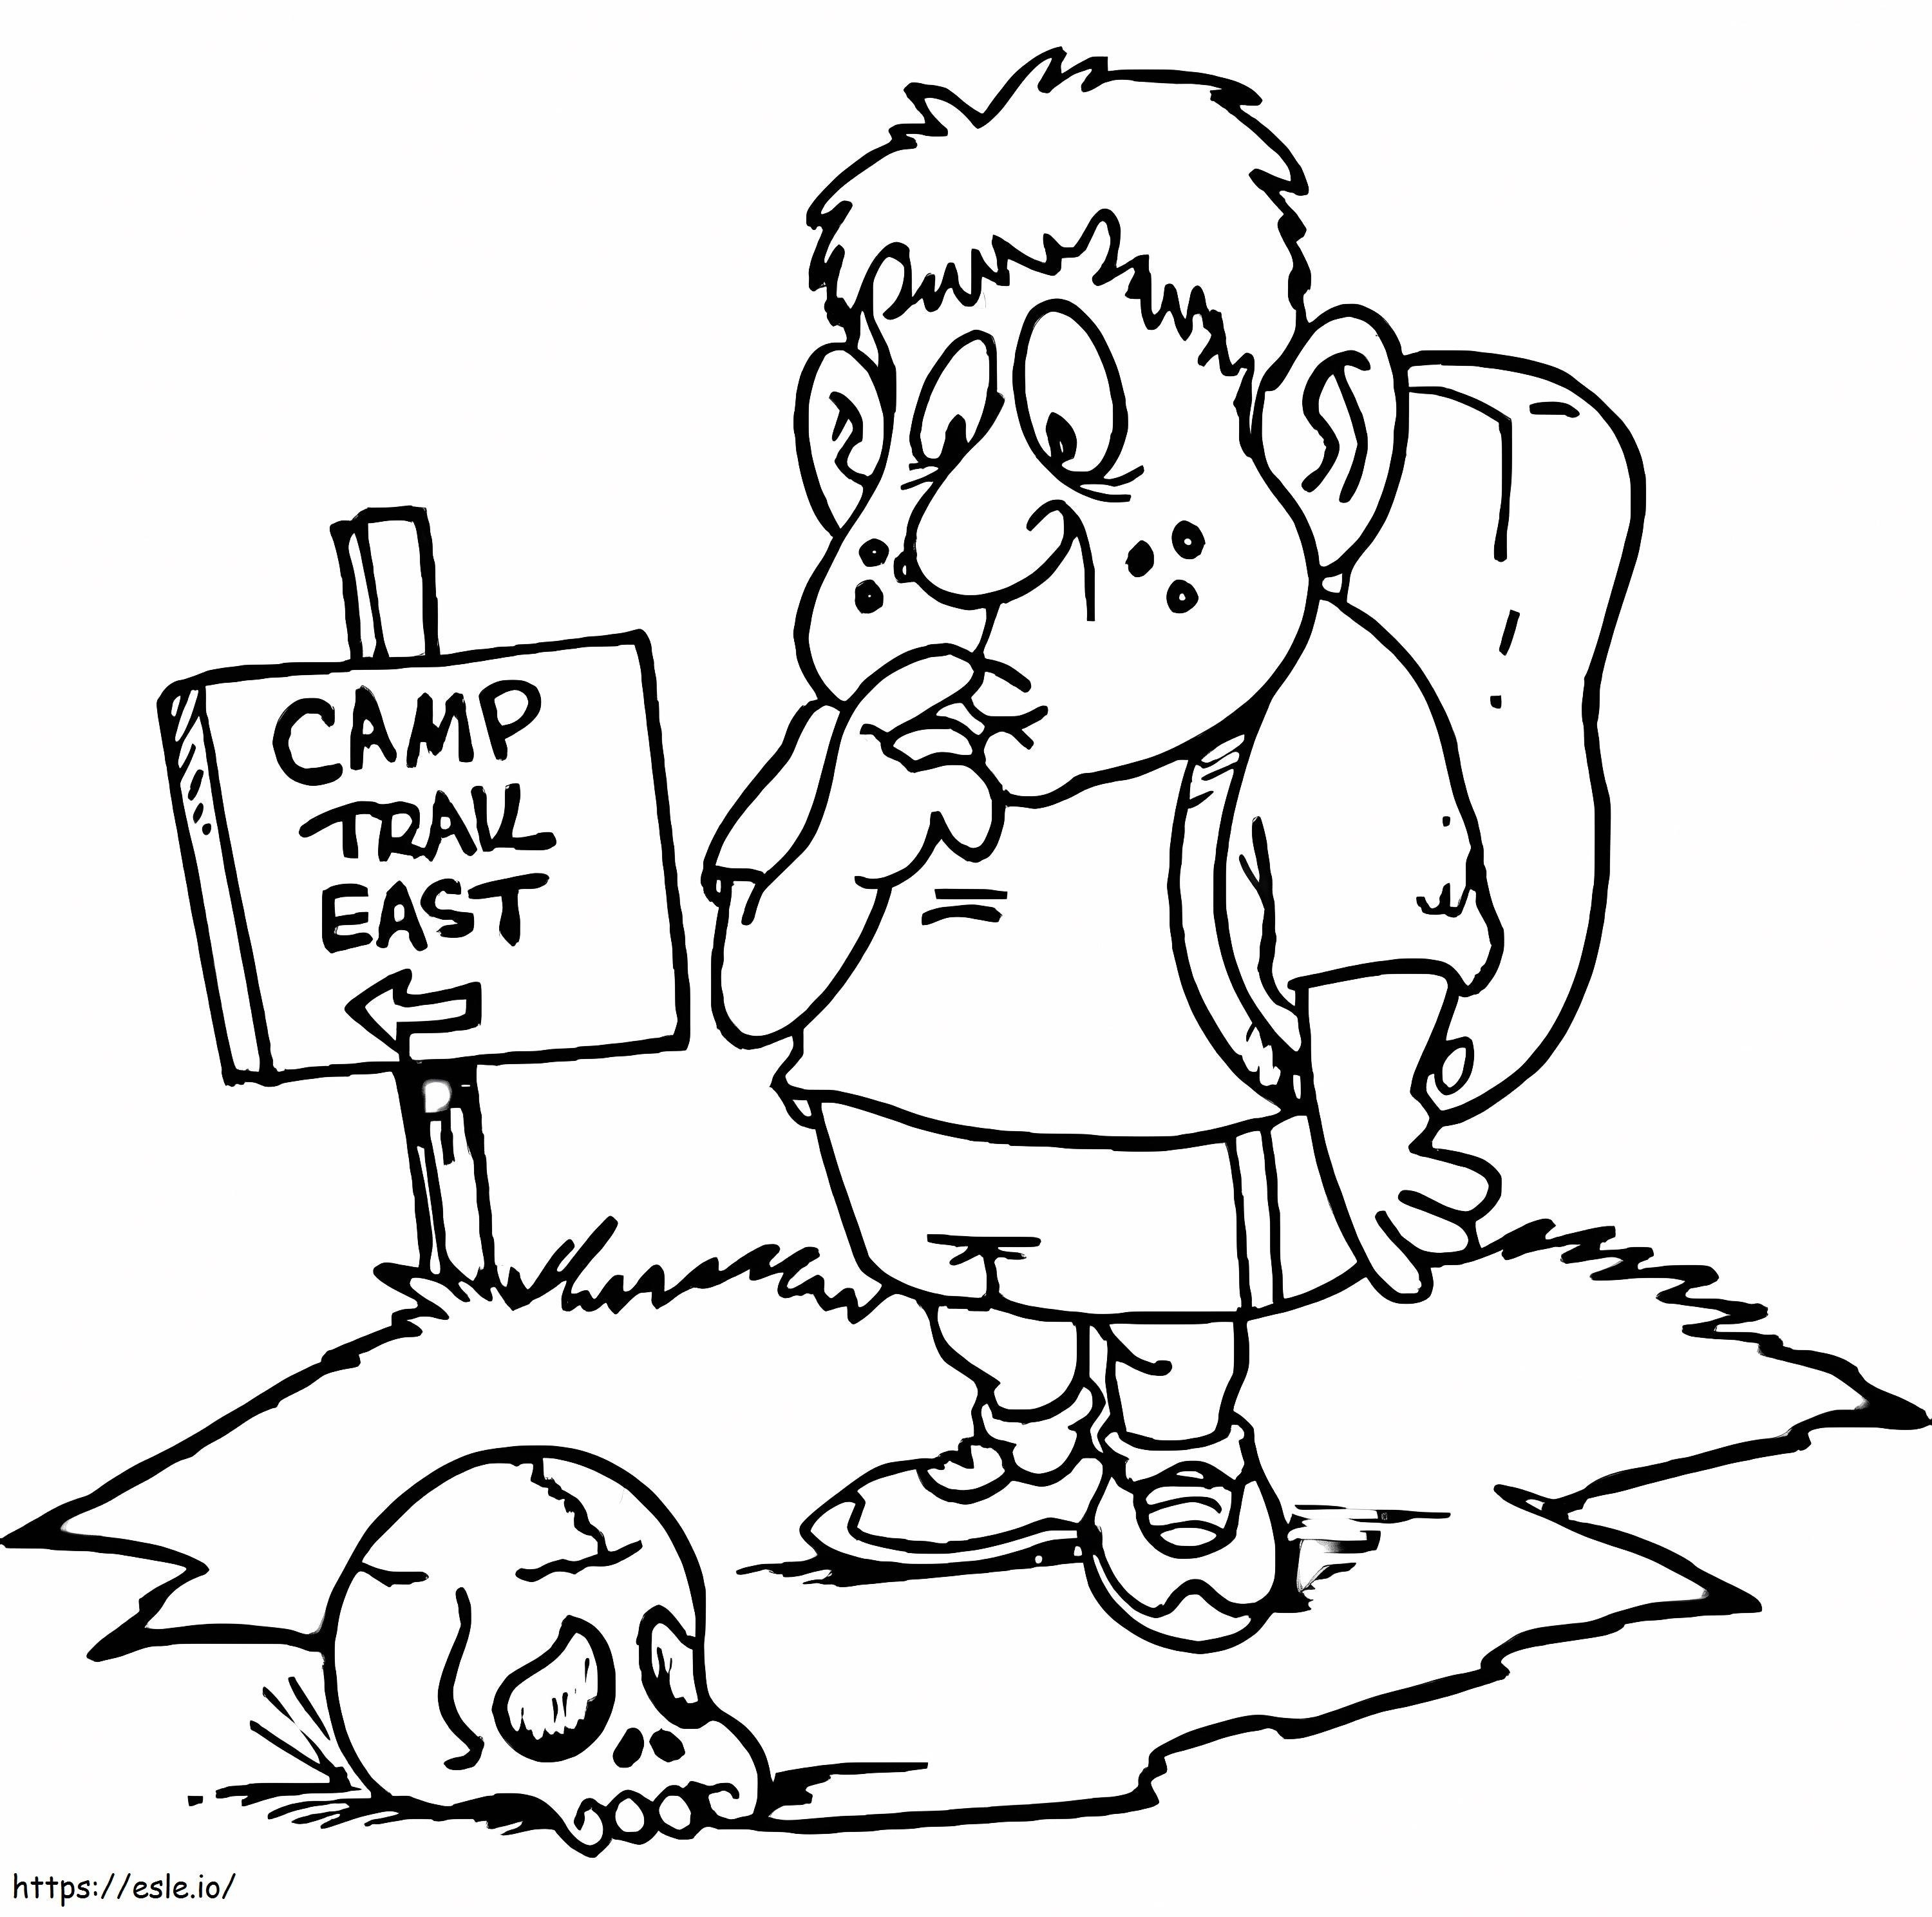 Camp Trail East coloring page